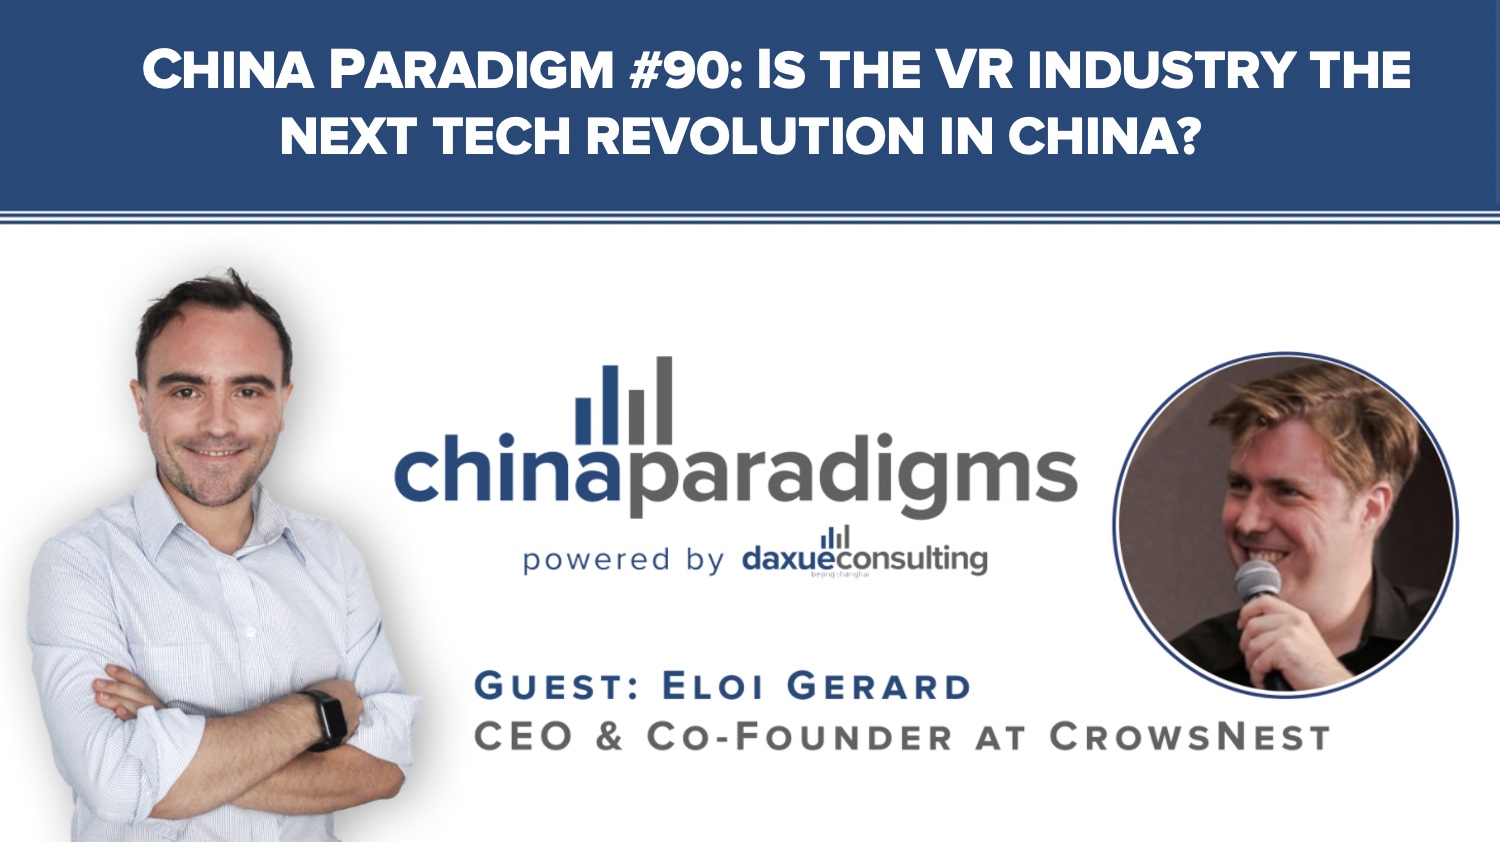 China Paradigm transcript #90: Is the VR industry the next tech revolution in China?